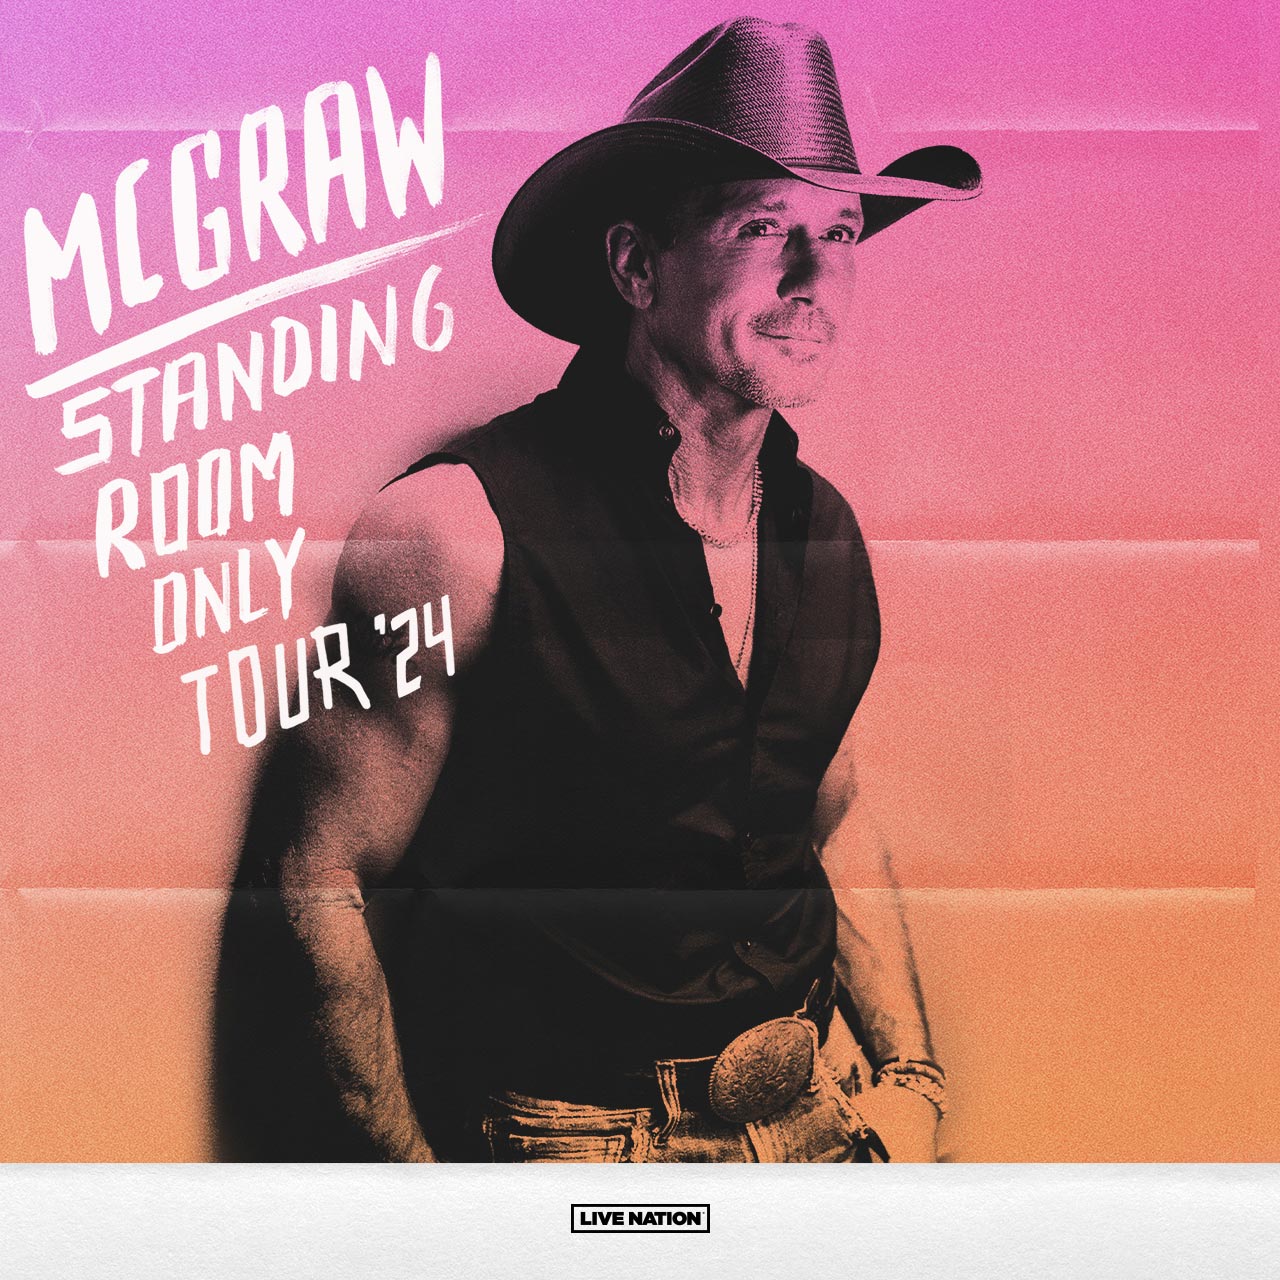 Standing Room Only Tour '24